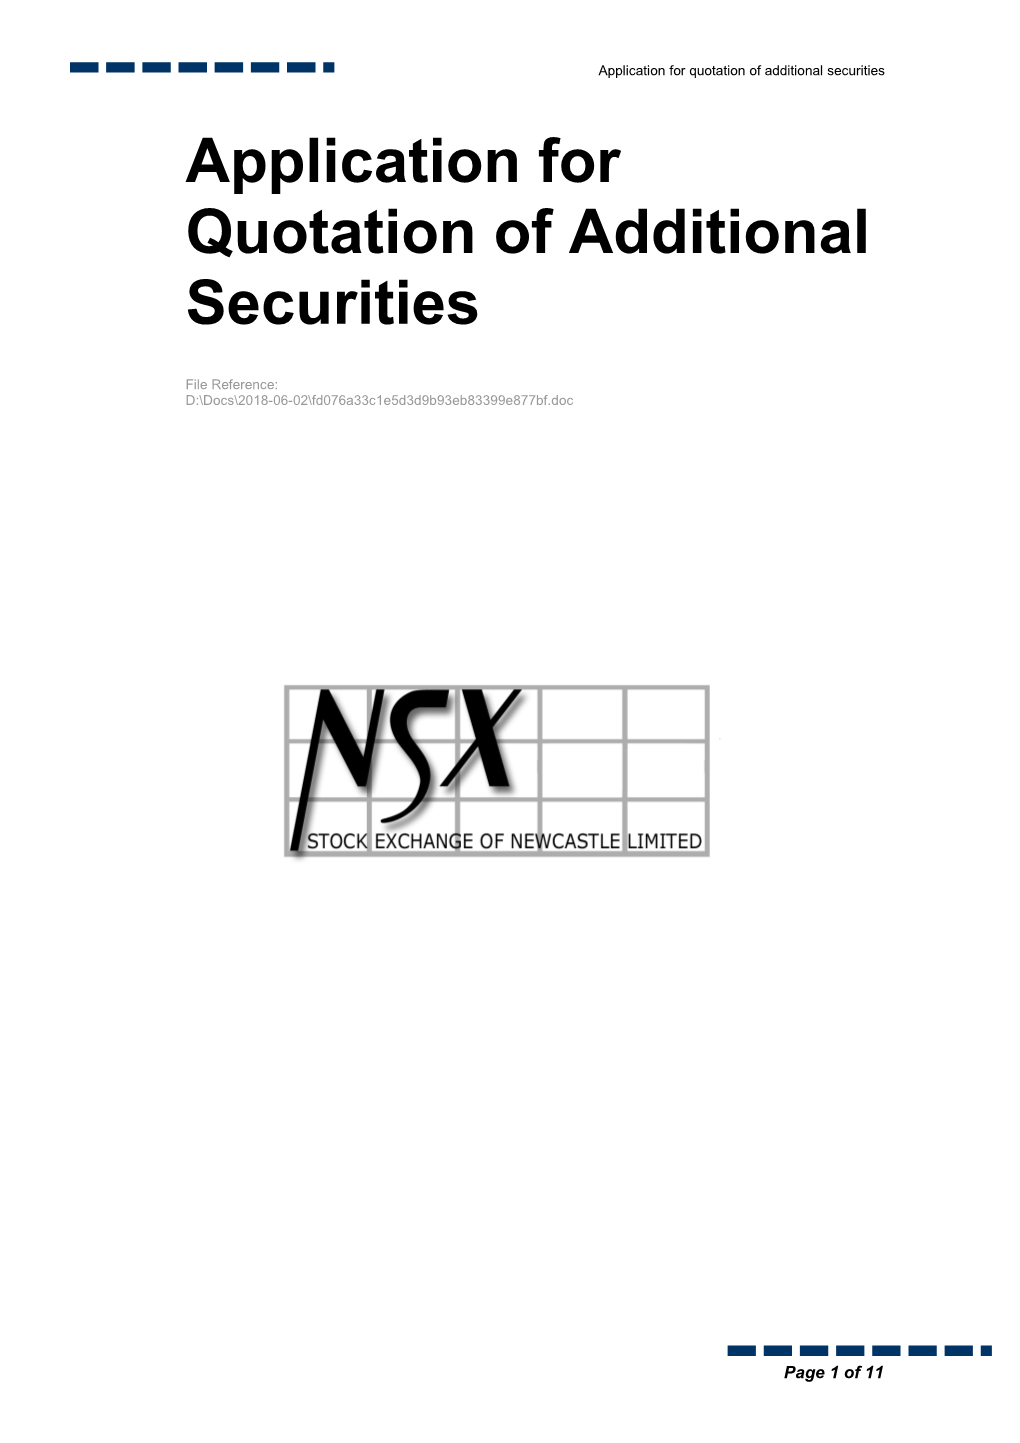 NSX Quotation of Additional Securities